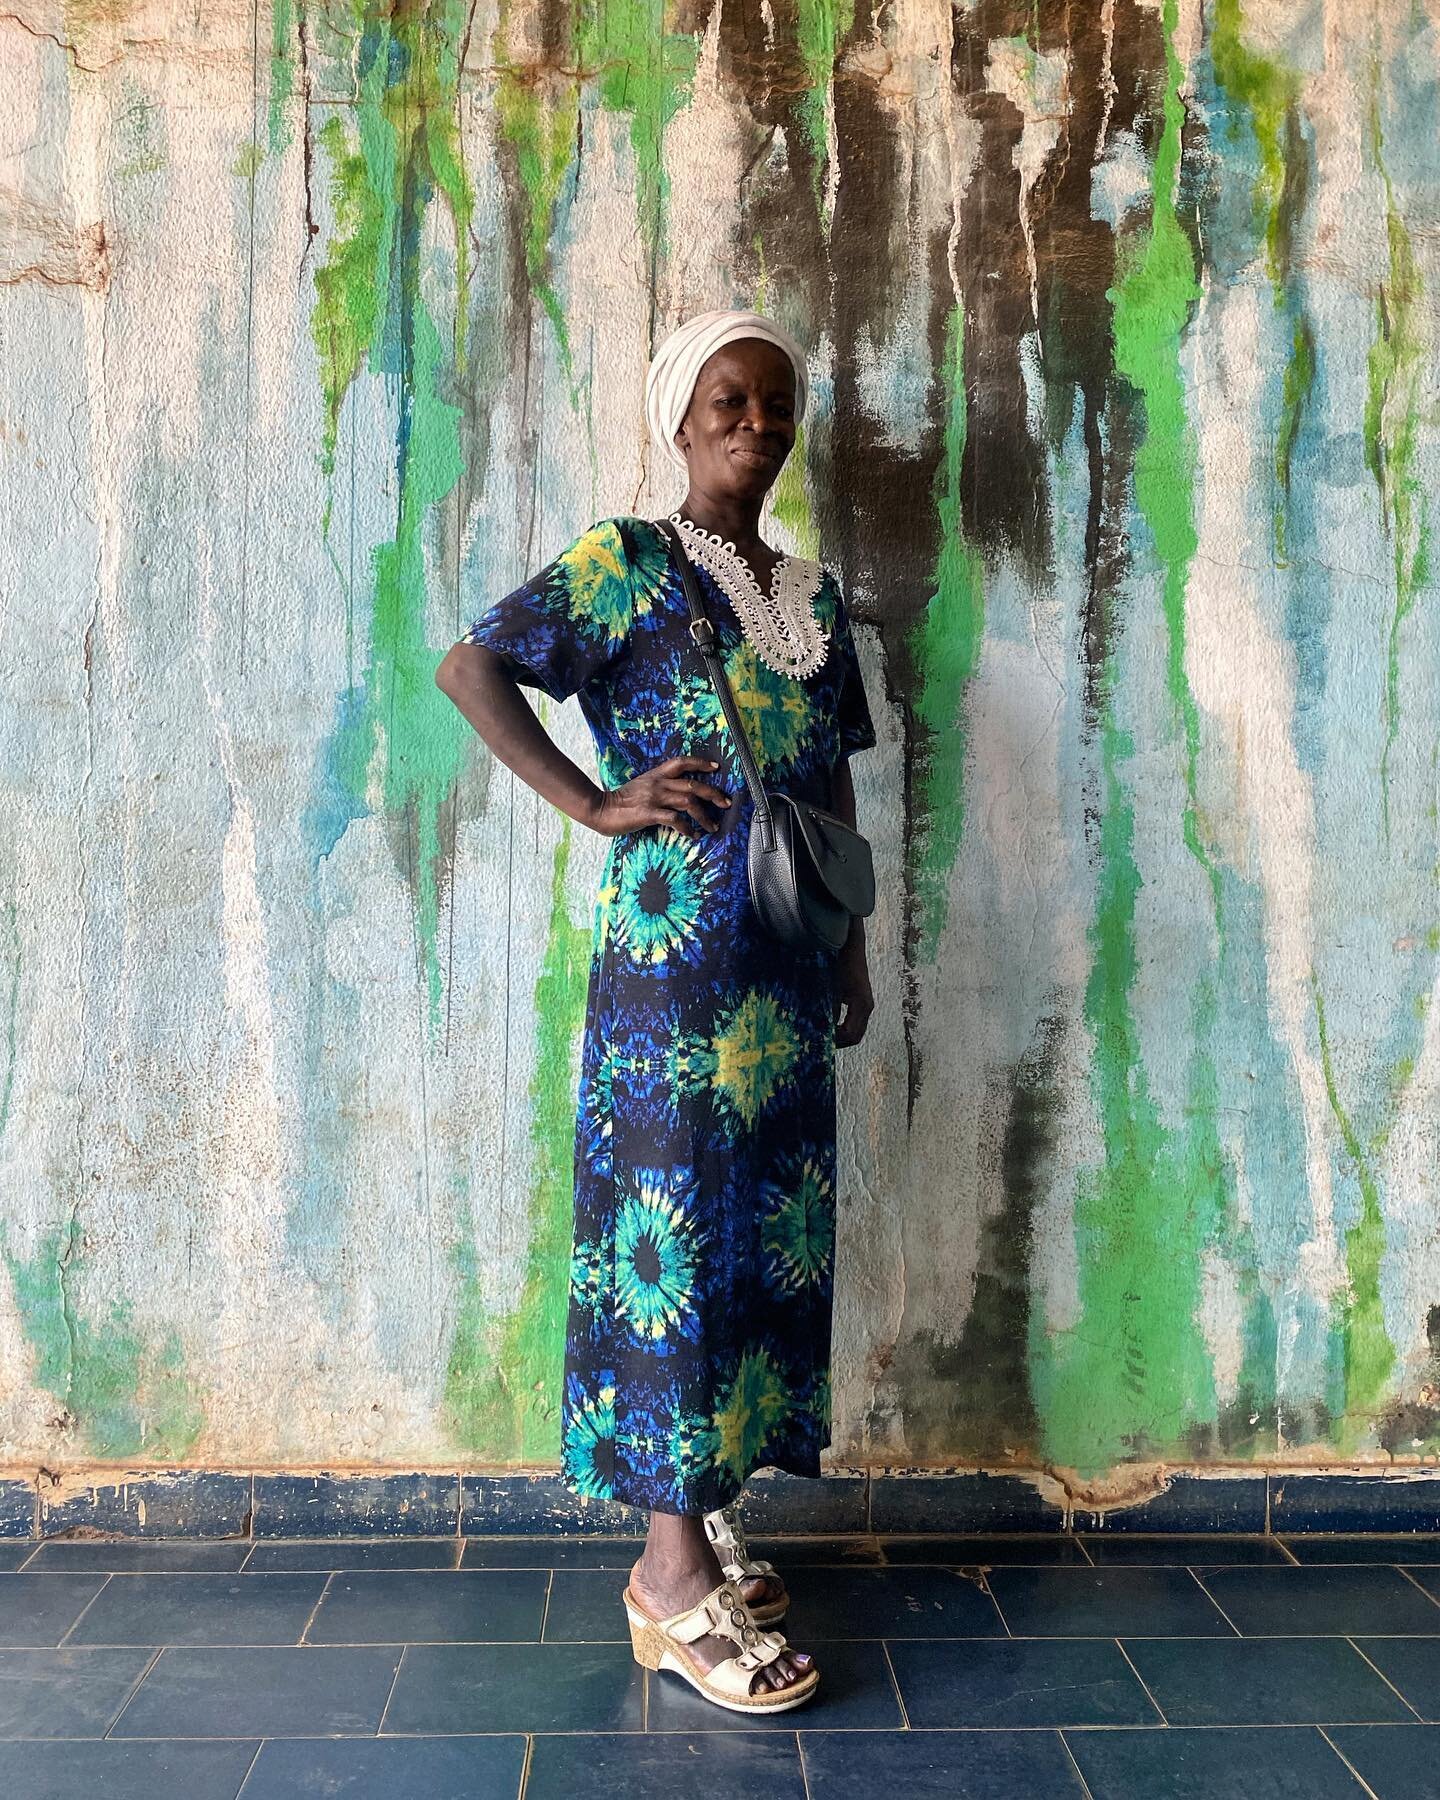 𝒜𝓃𝓉𝑜𝒾𝓃𝑒𝓉𝓉𝒶 ~  I asked to take her photo when she passed the wall and blended in so perfectly #bissau